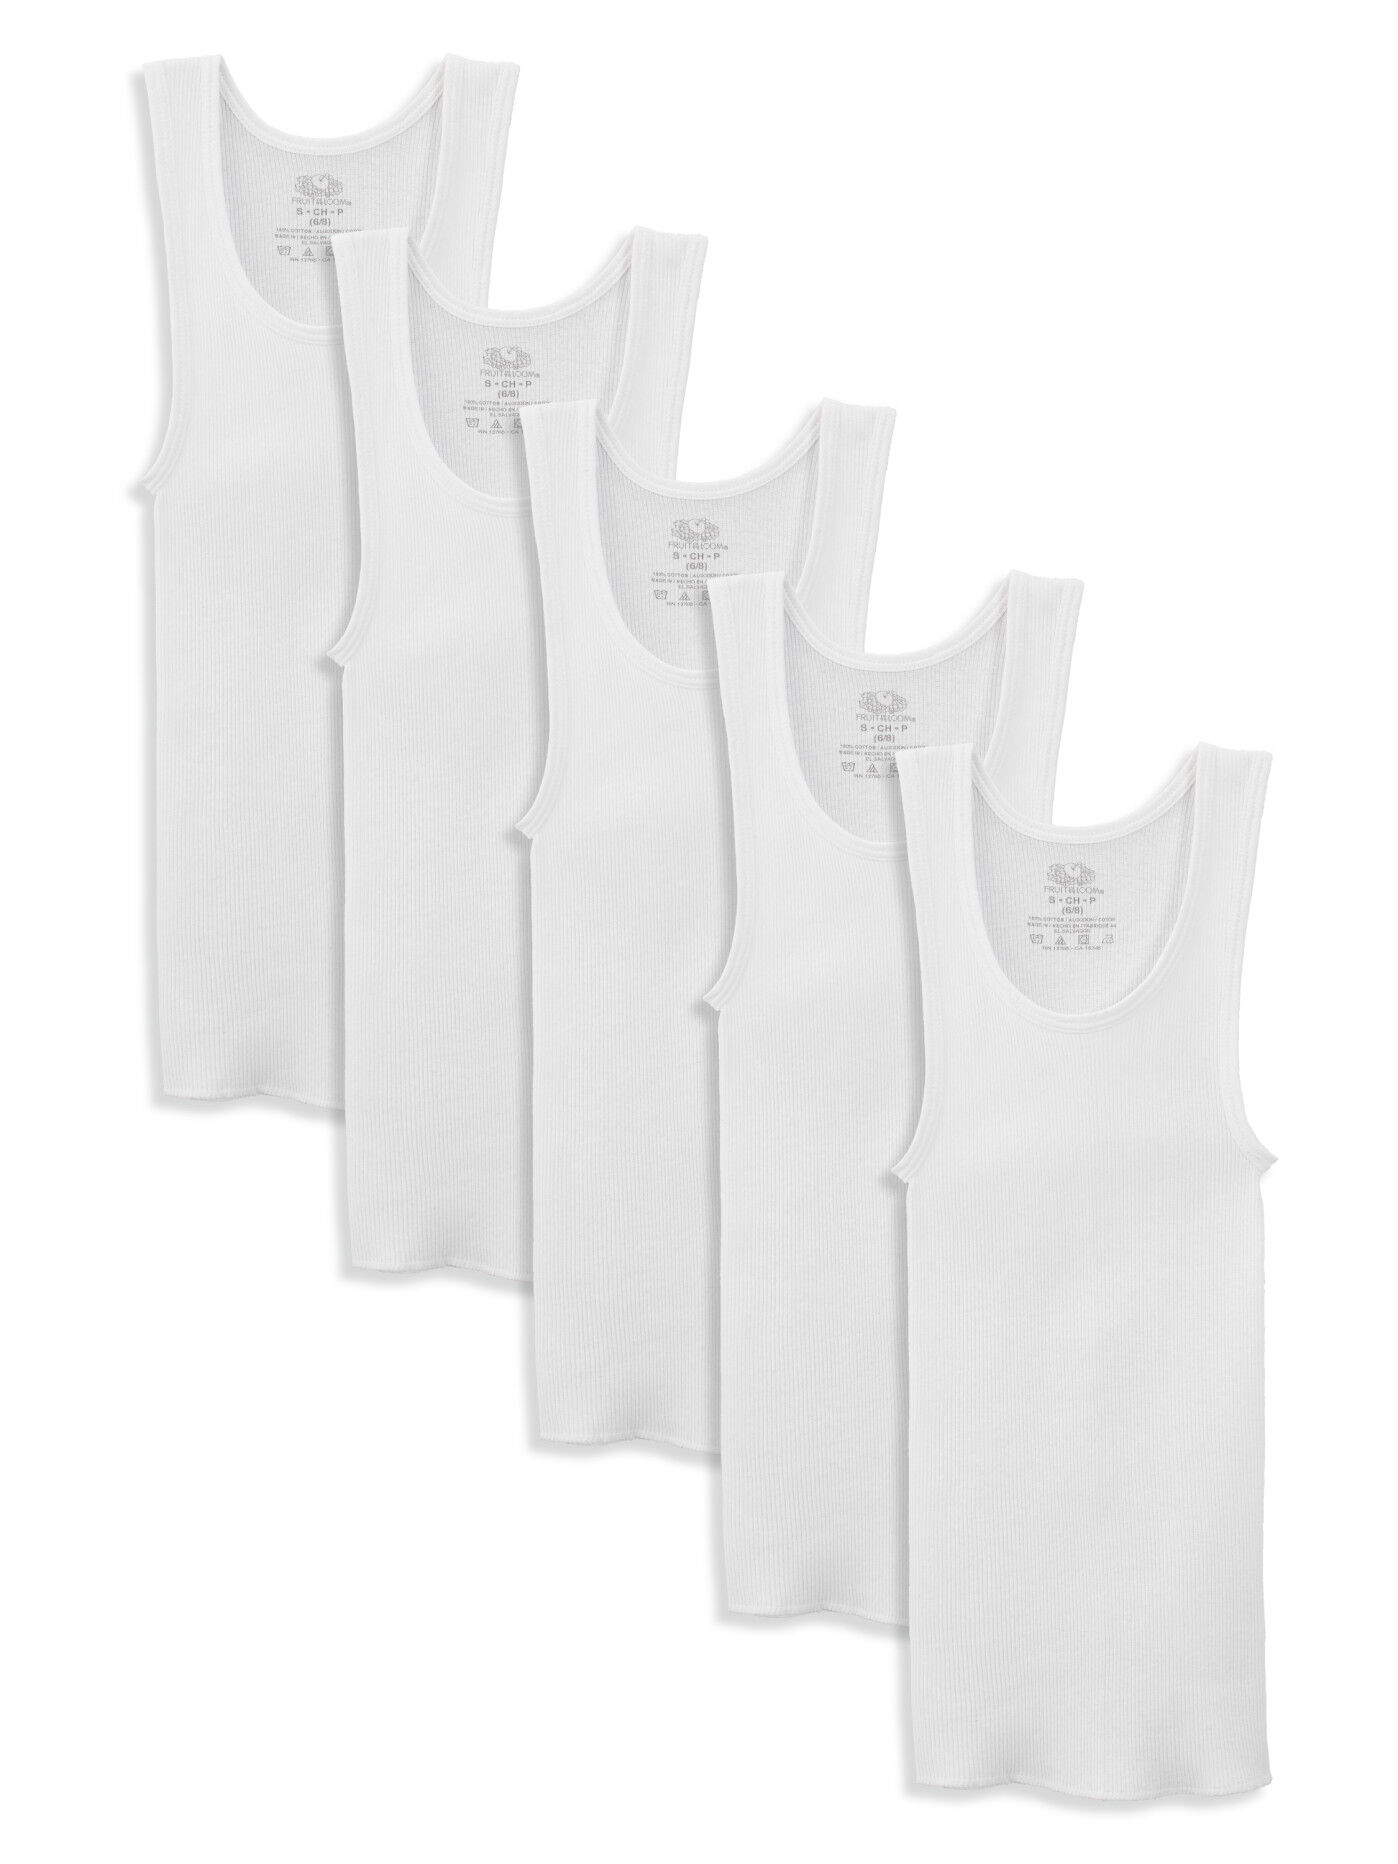 Fruit of the Loom Boys White Tank Top A-Shirts 5 Pack